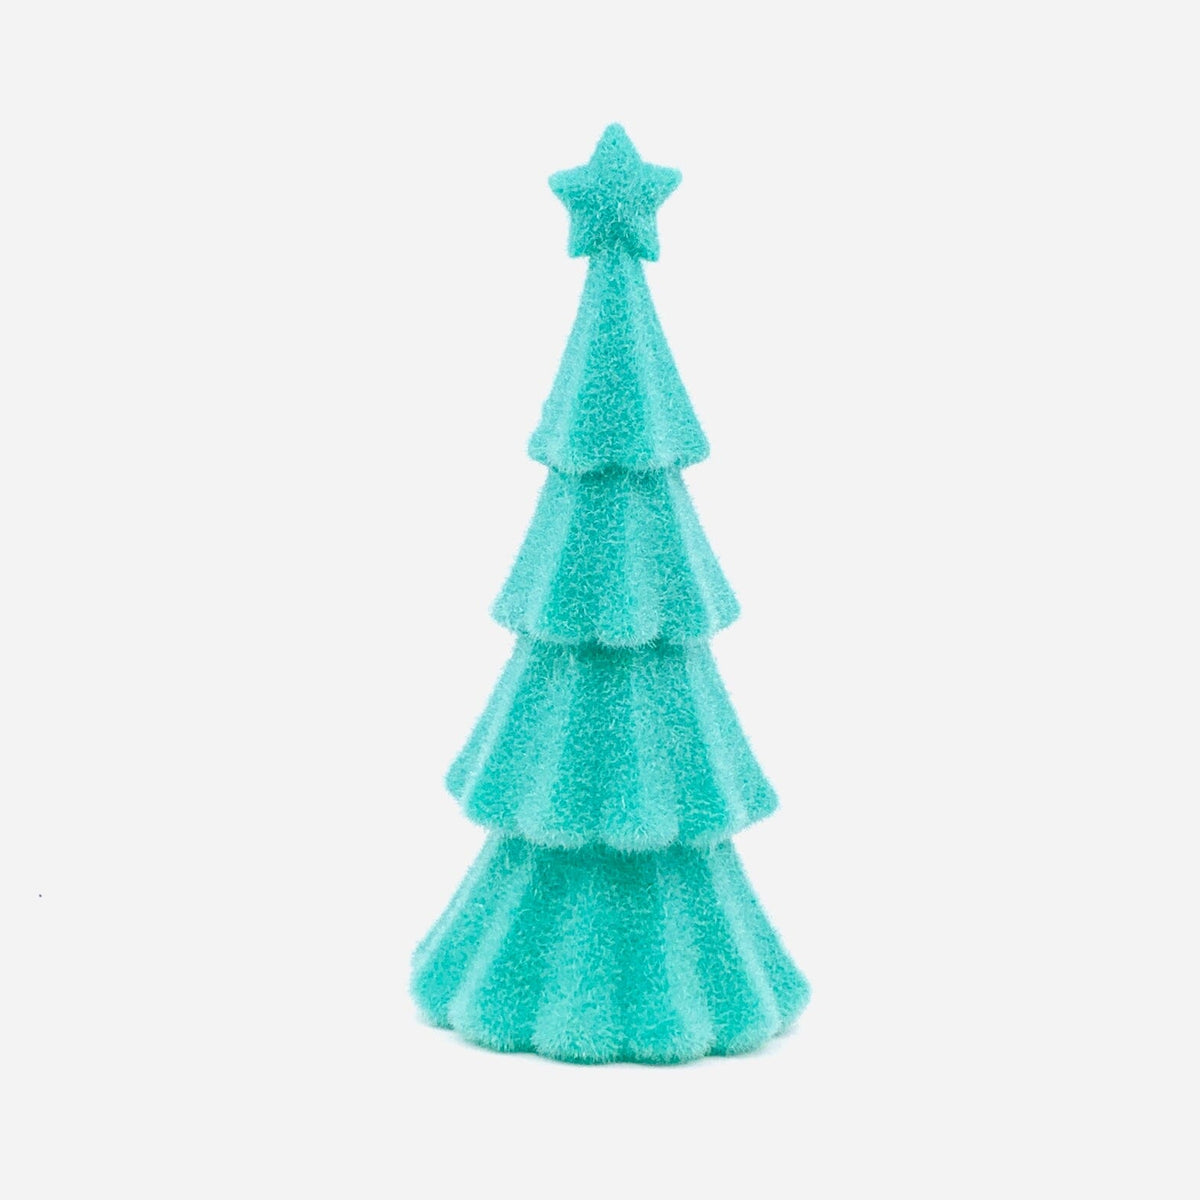 Flocked Trees Decor One Hundred 80 Degrees Turquoise Small 